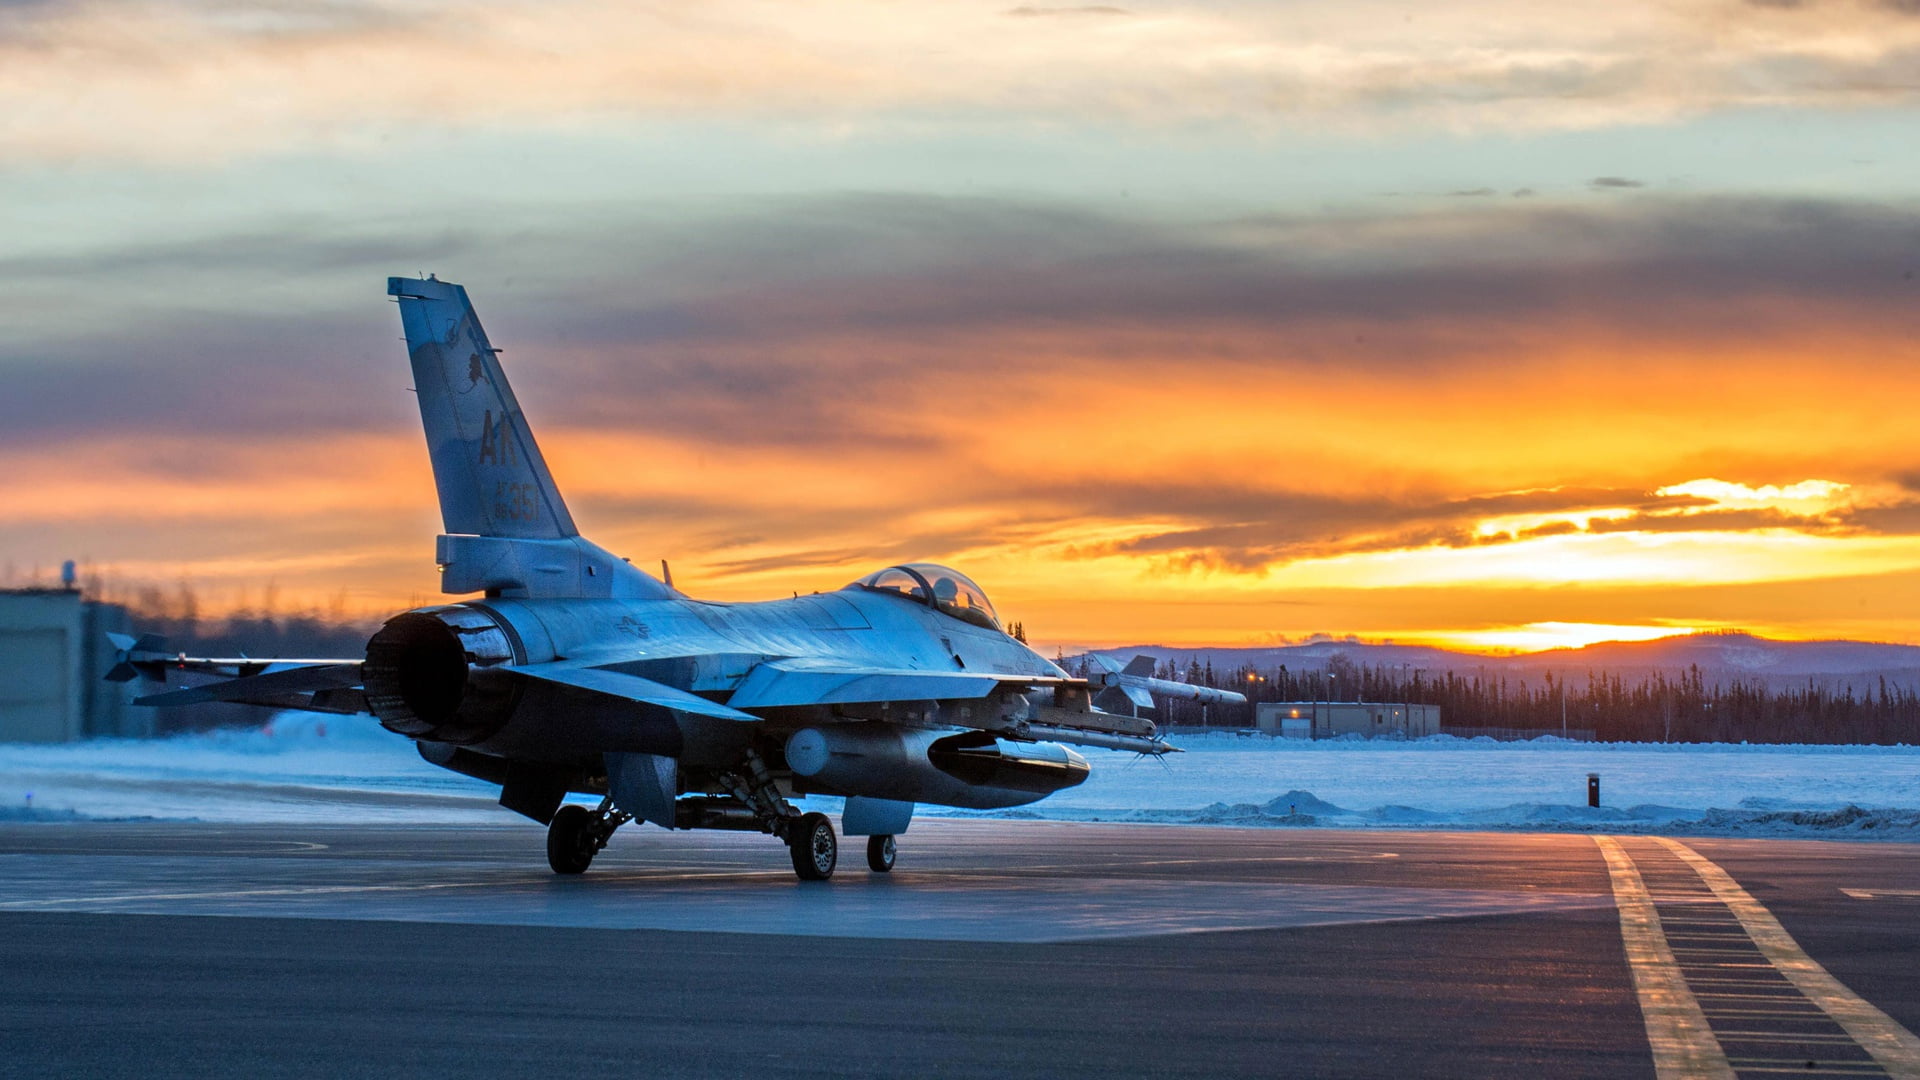 F-16, Fighting Falcon, General Dynamics, the fourth generation fighter